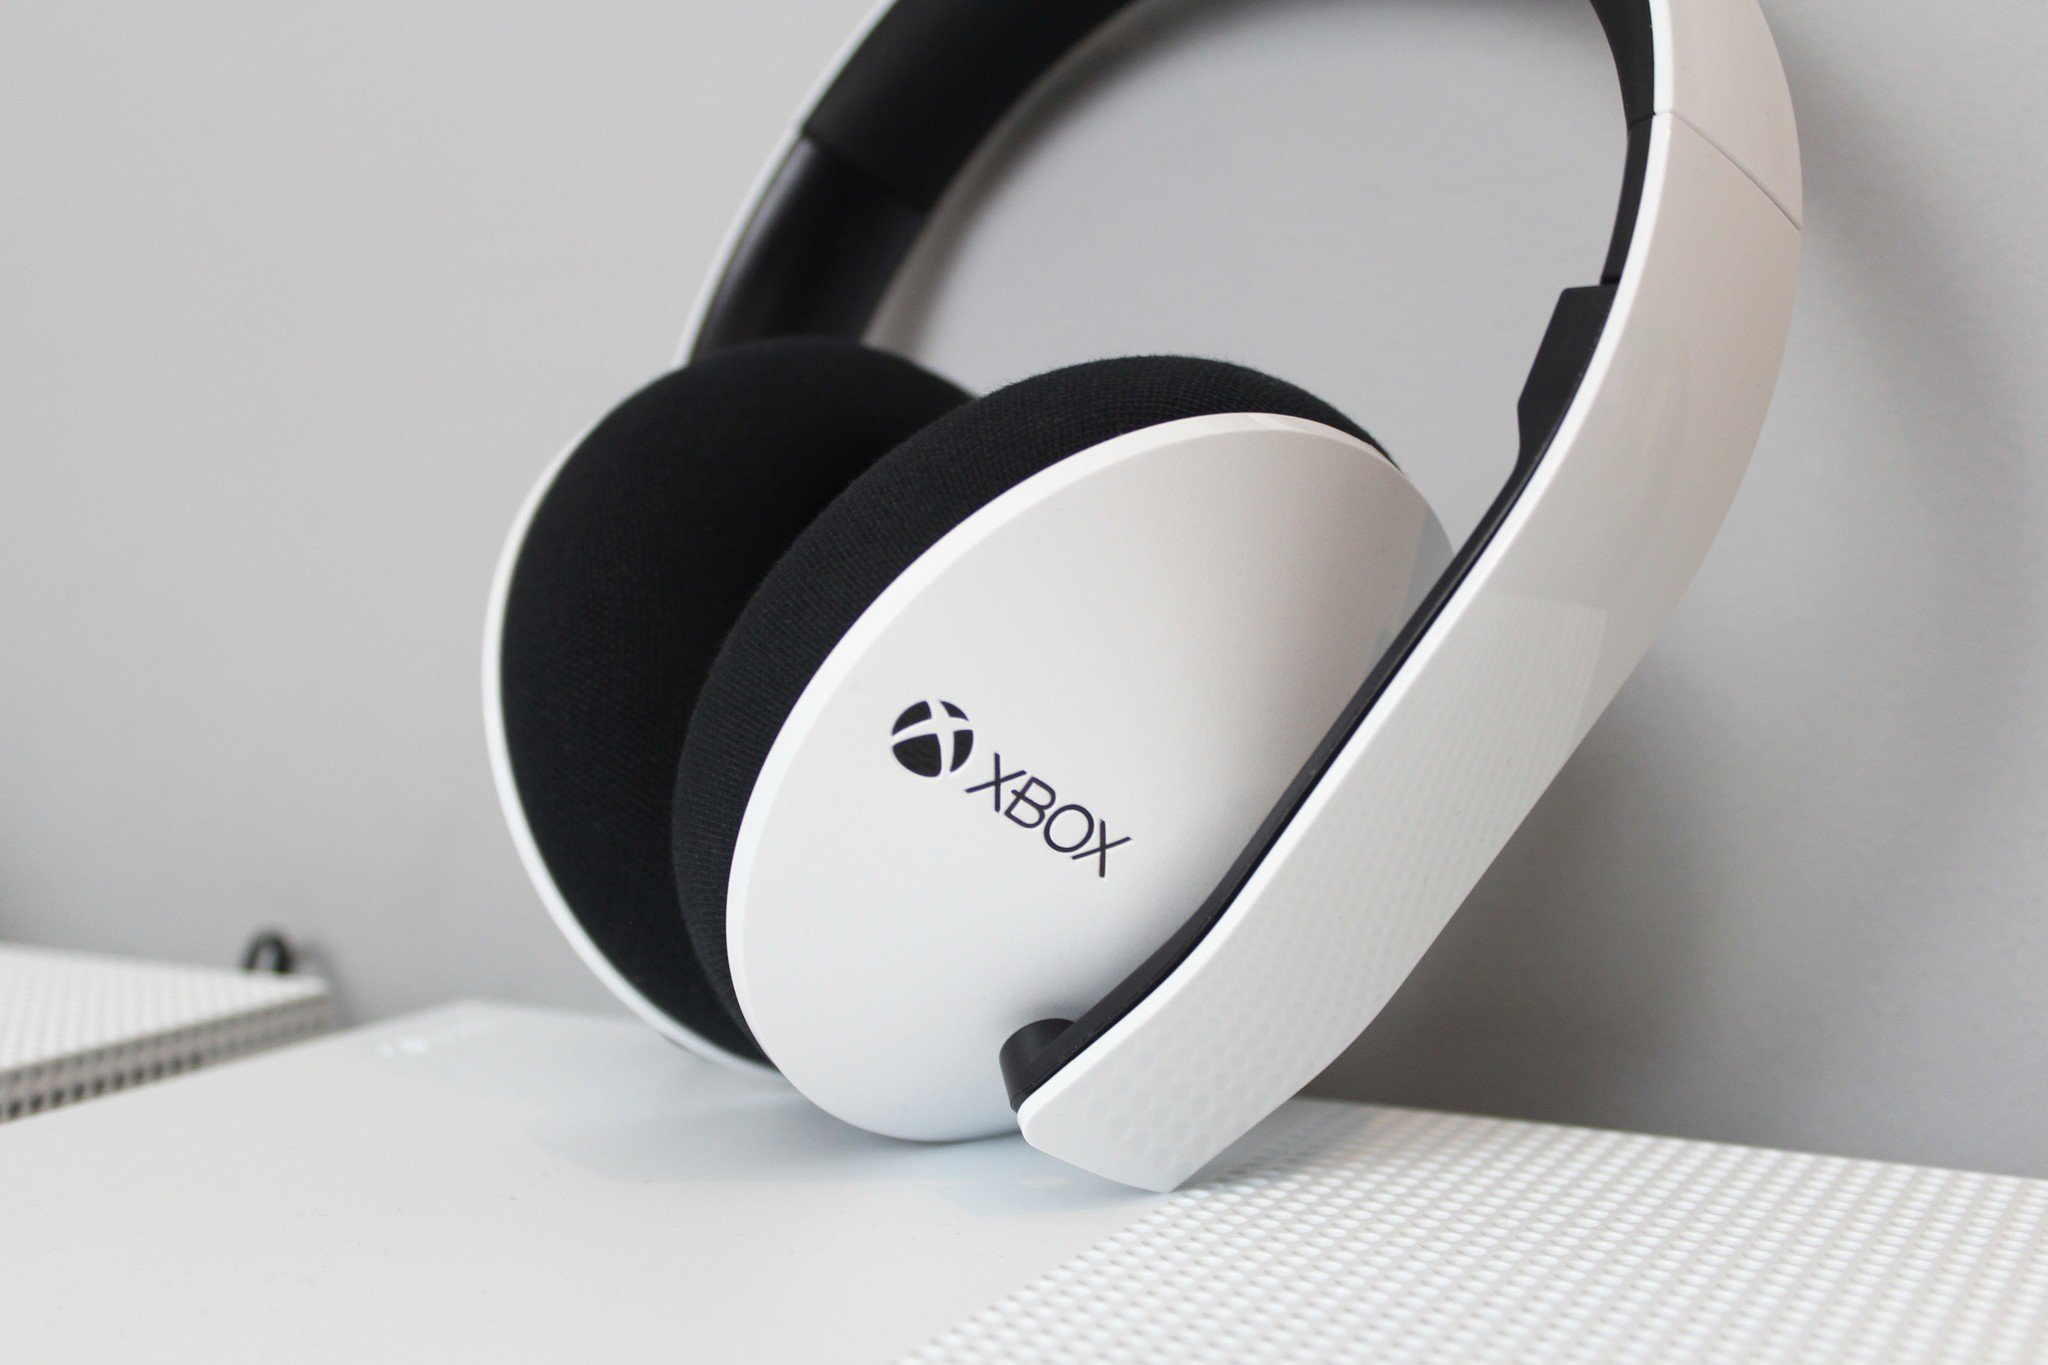 Windows Sonic Vs Dolby Atmos: Which Headphones Are Best For Xbox One?